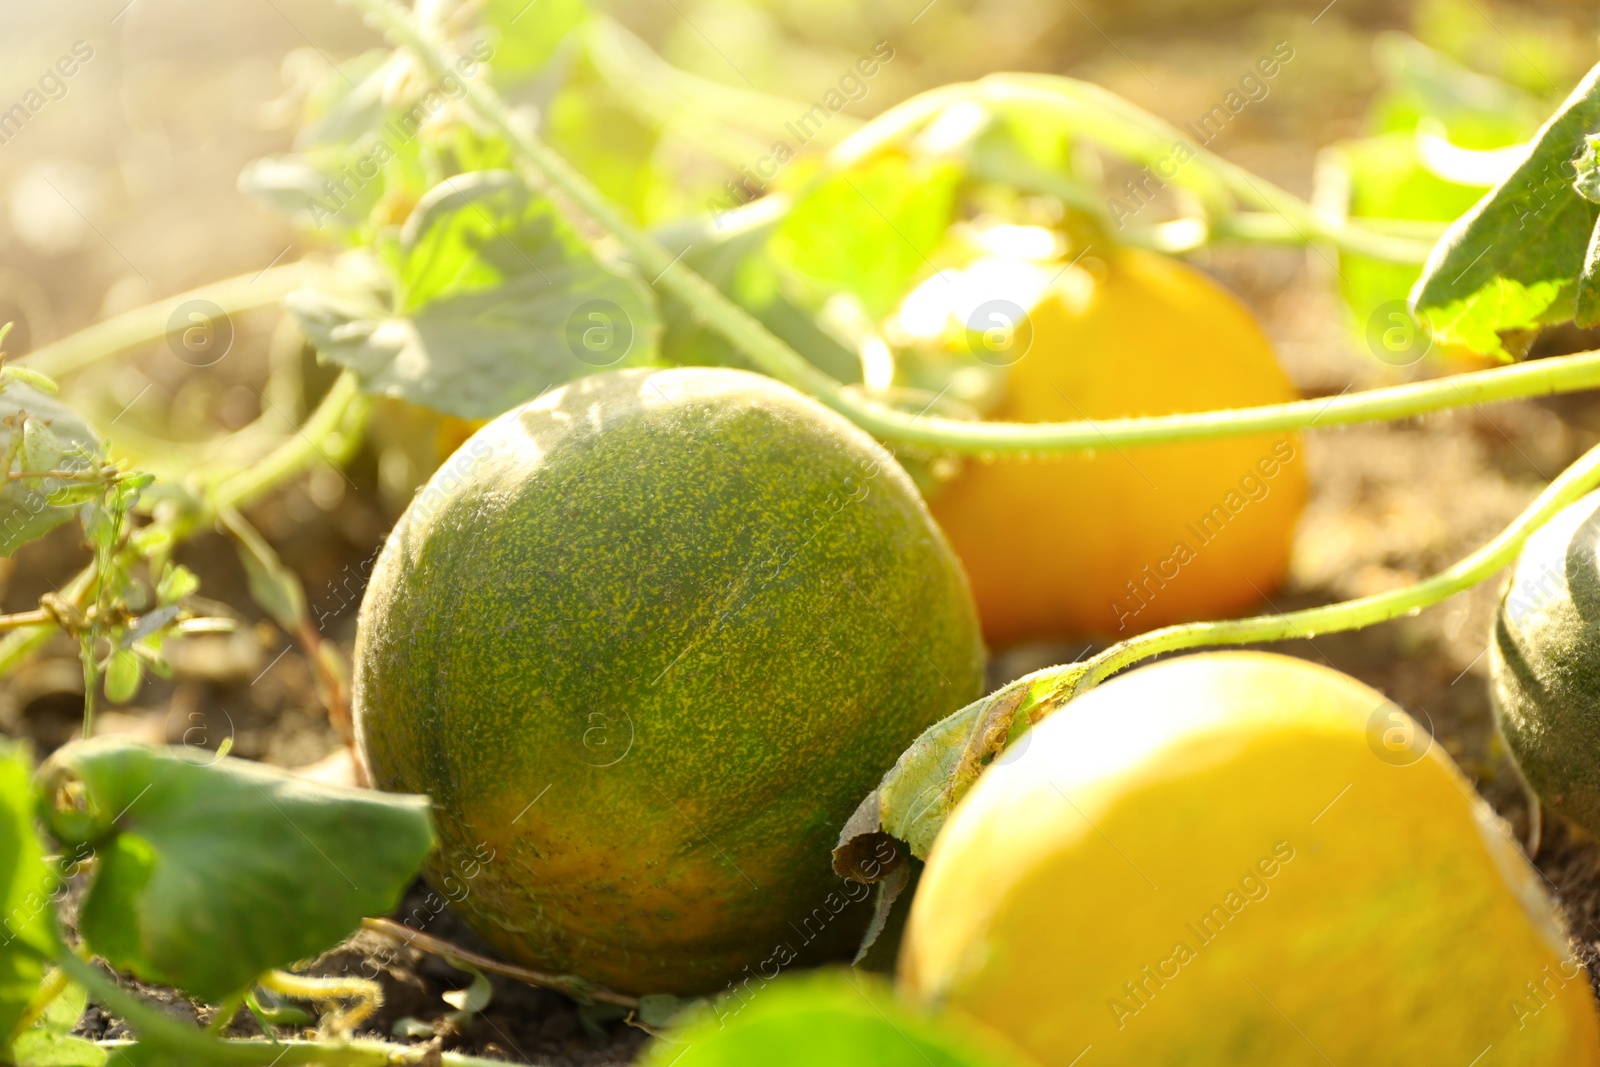 Photo of Fresh juicy melons growing in field on sunny day